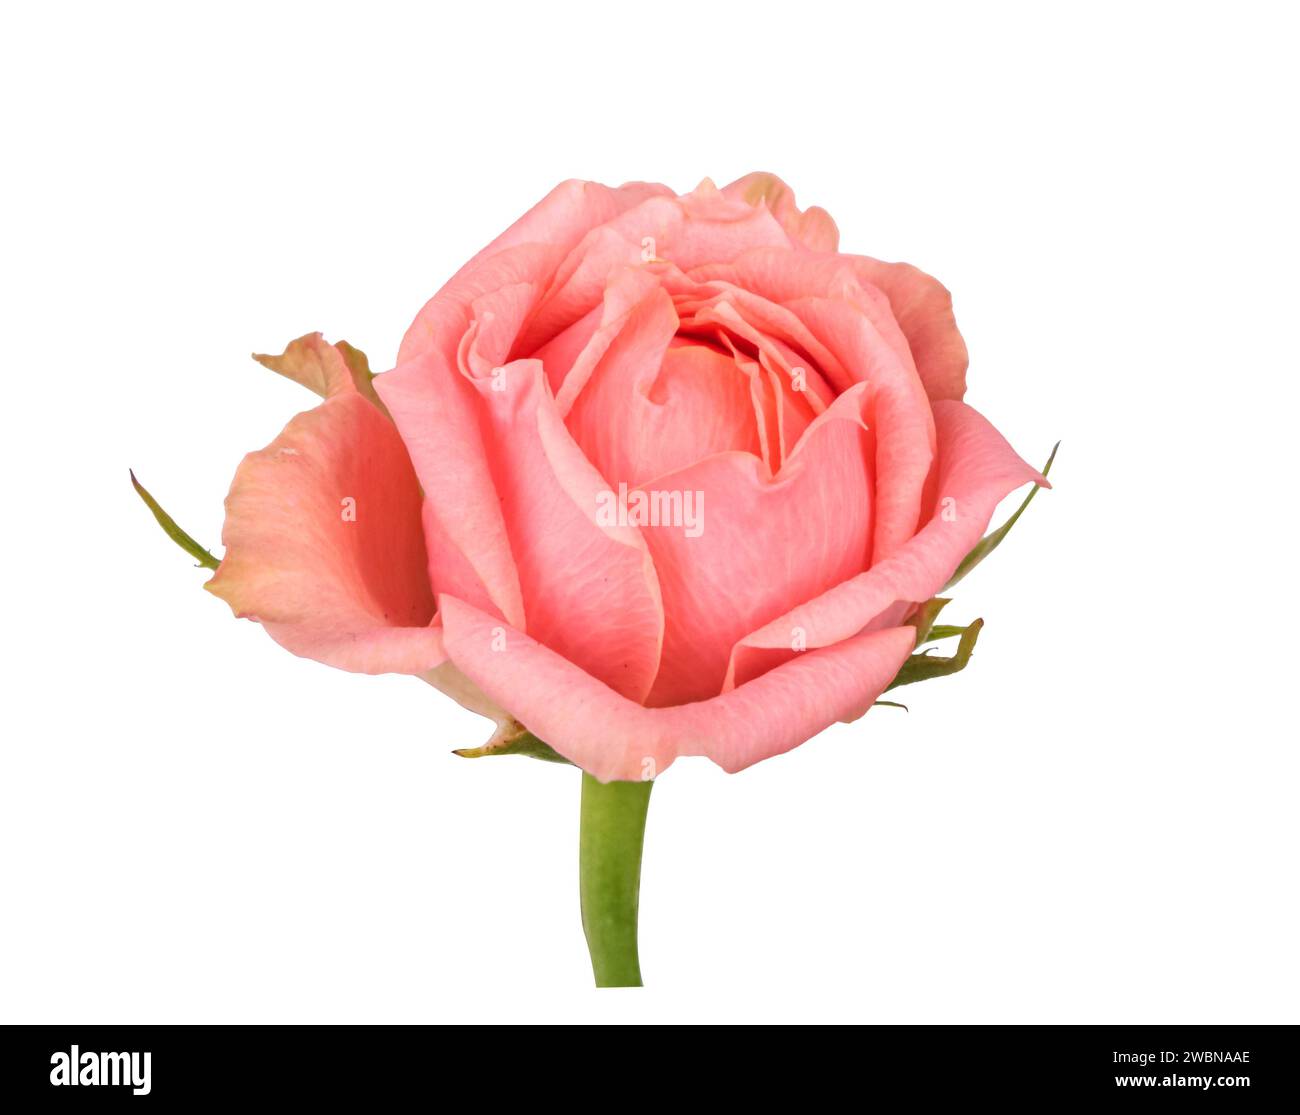 Delicate pink rose with leaves isolated on white background. Beautiful pink rose blossom with clipping mask. Stock Photo